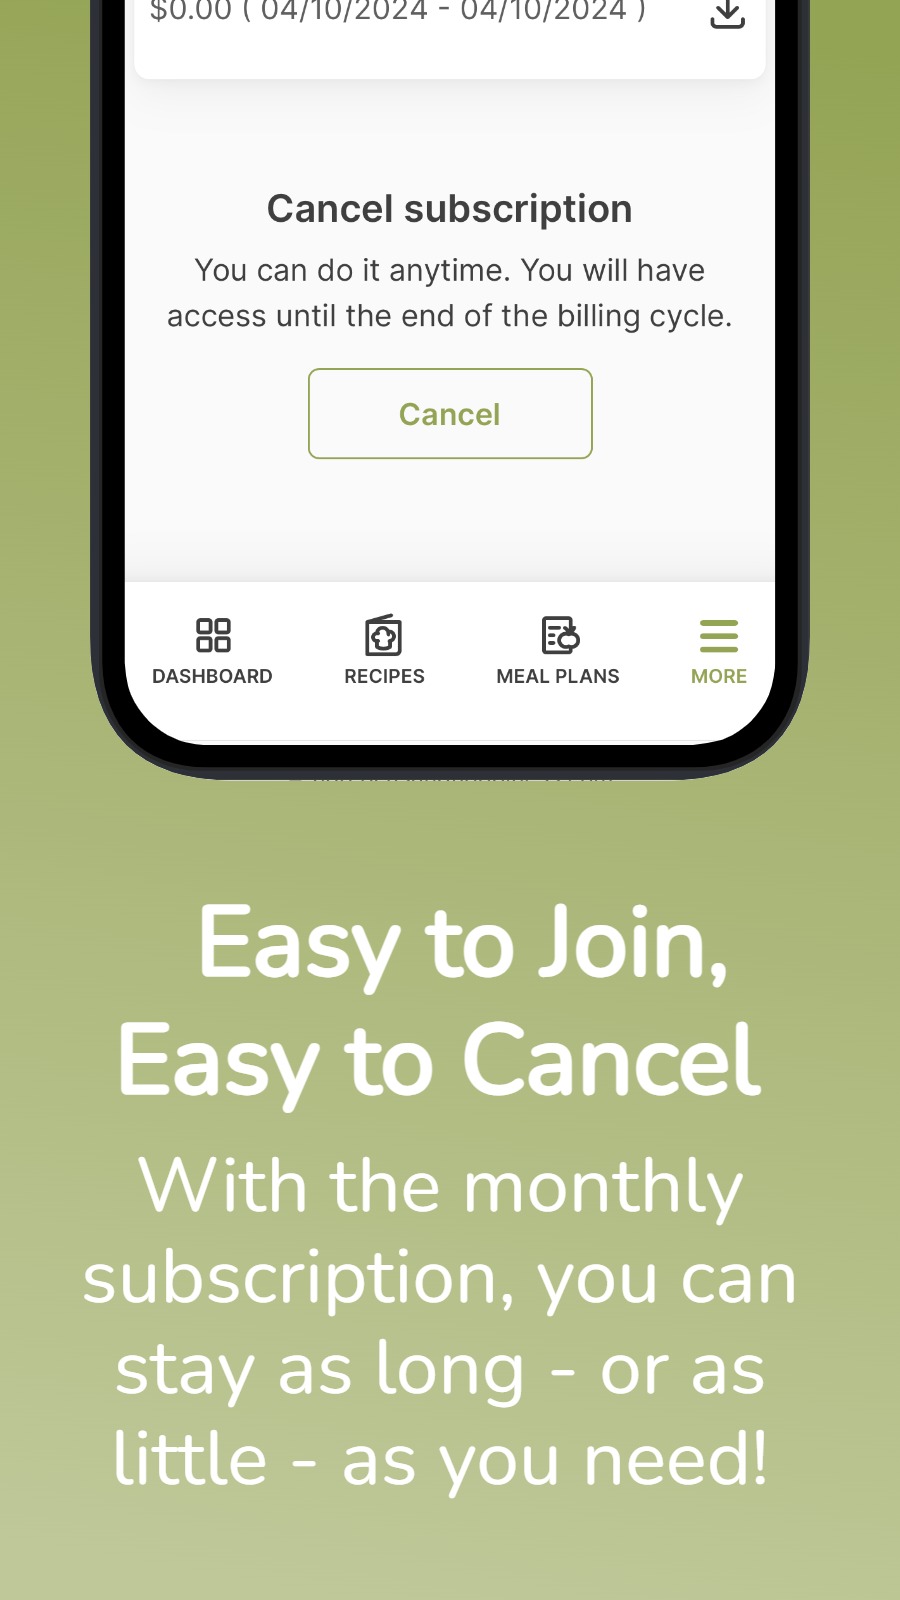    Easy to Join,  Easy to Cancel - With the monthly subscription, you can stay as long - or as little - as you need!